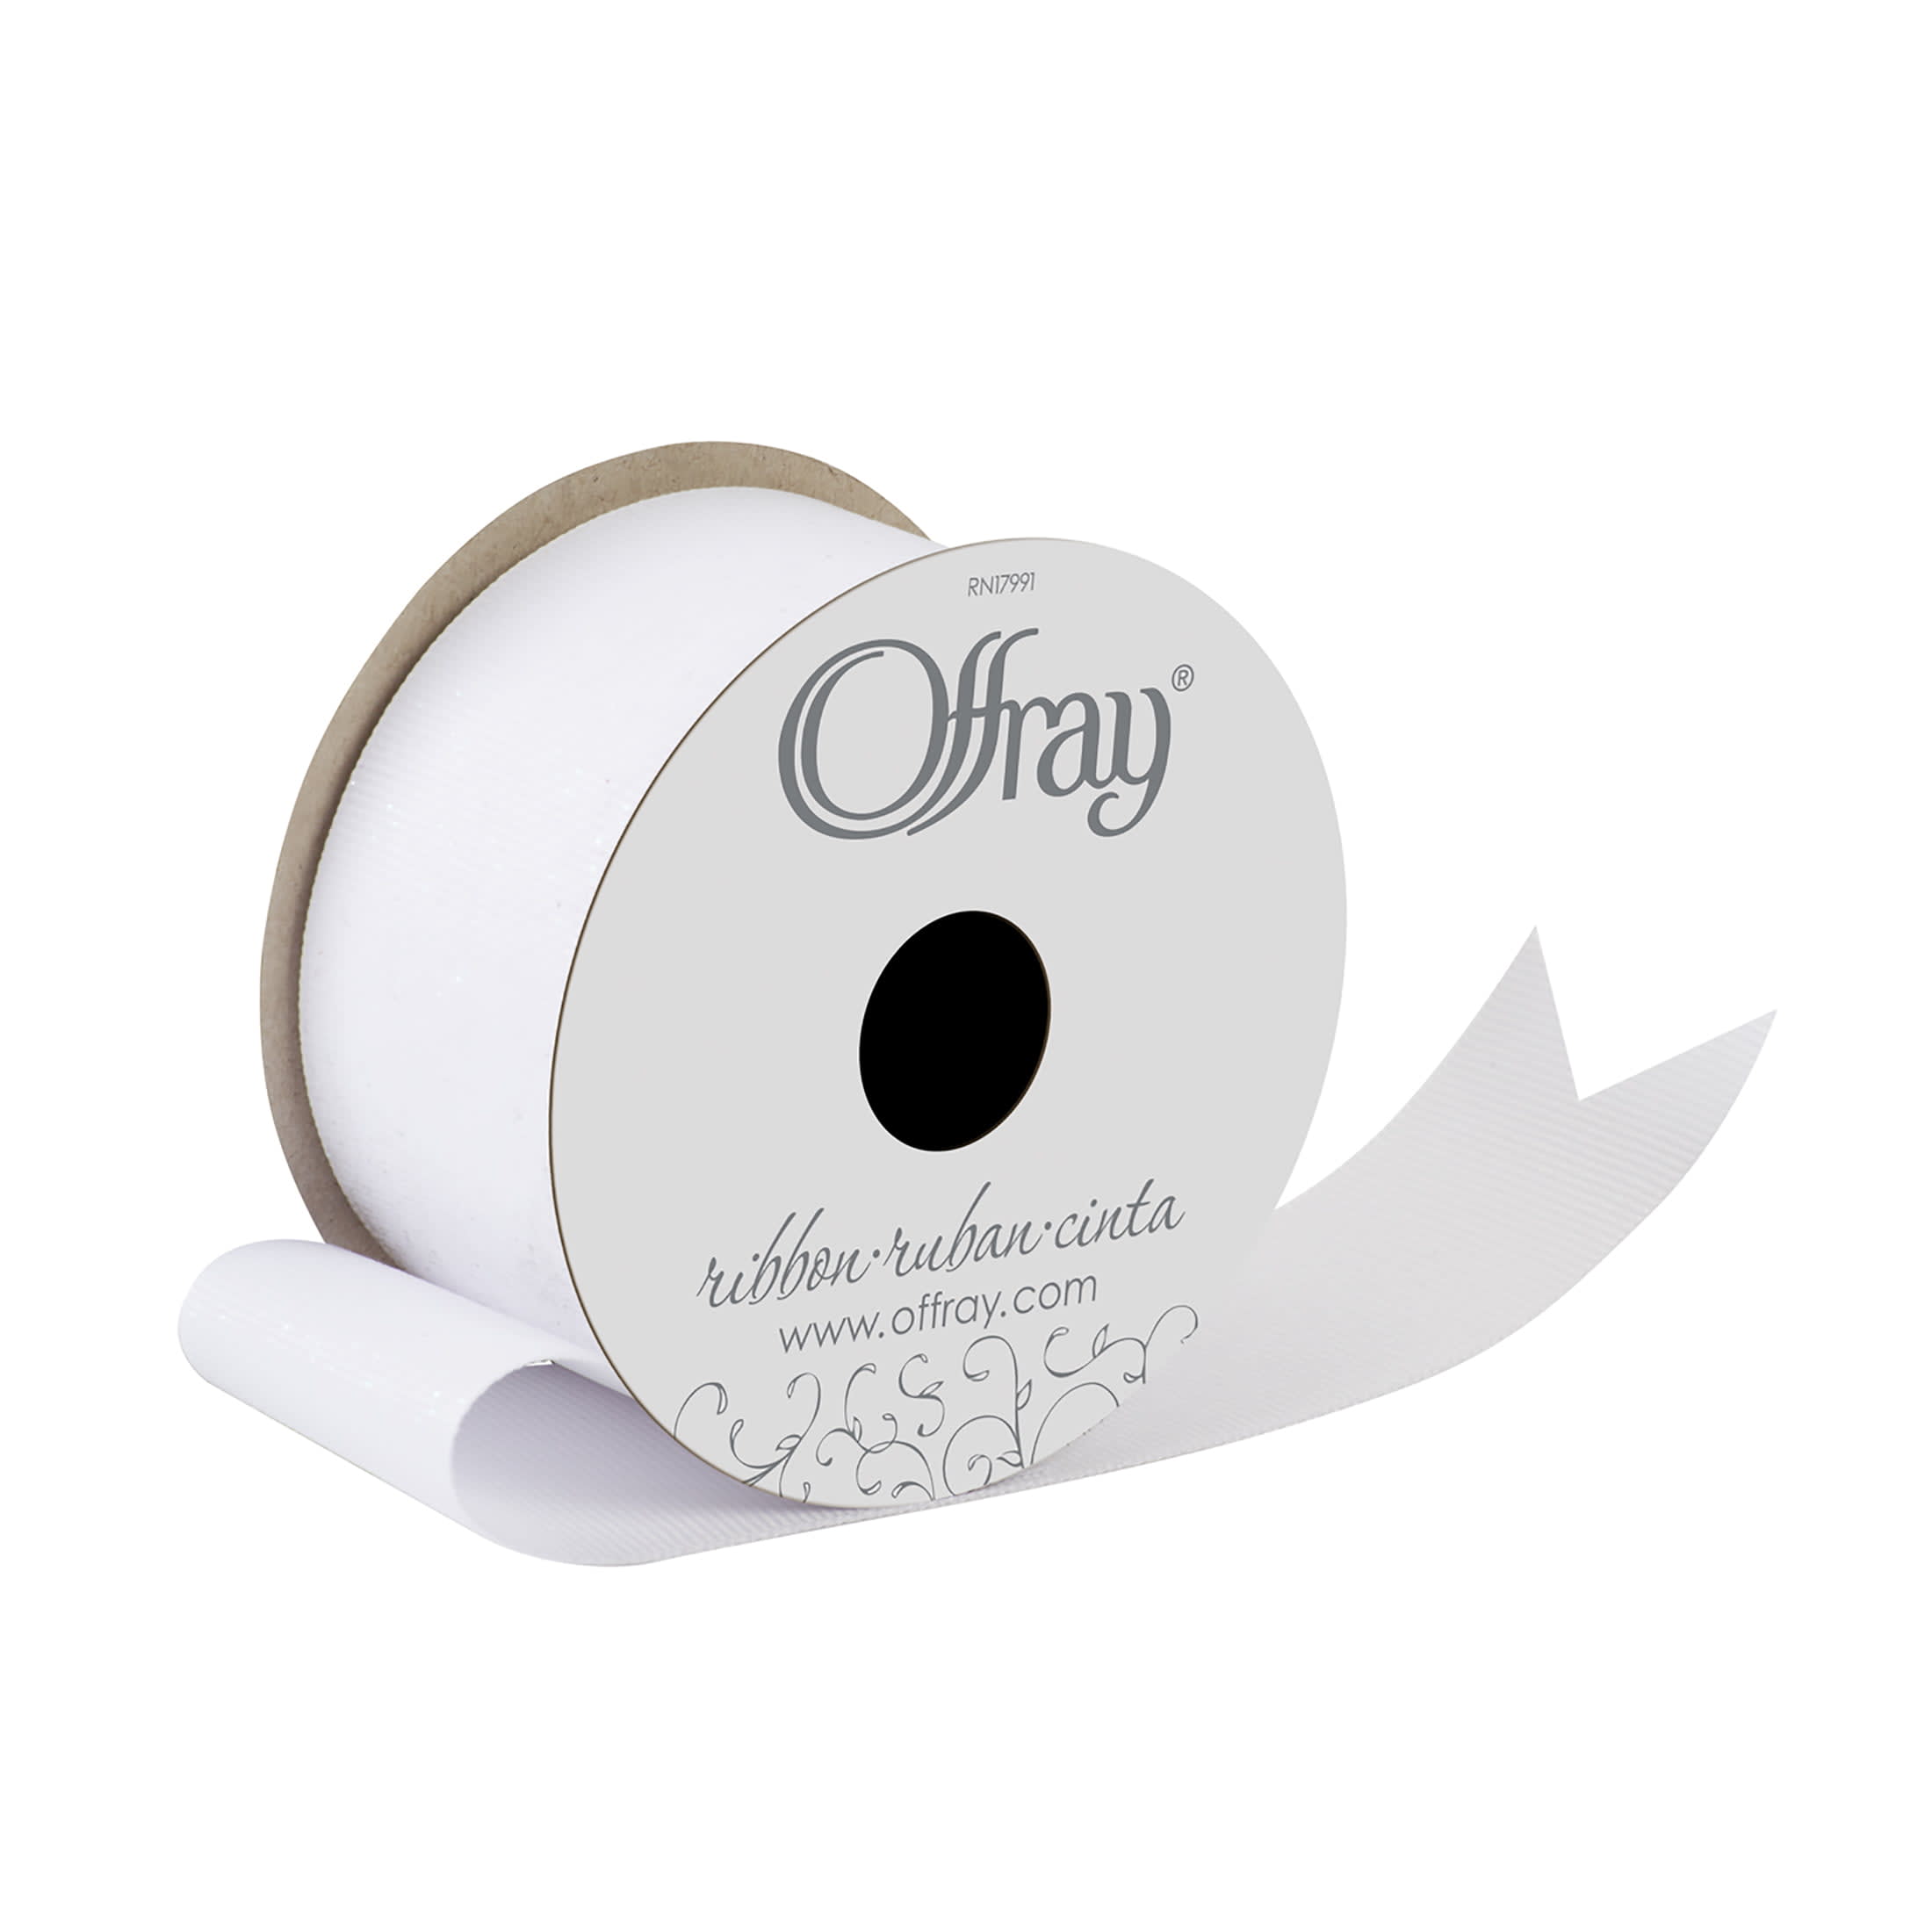 Offray Ribbon, Silver 3/8 inch Metallic Ribbon, 15 feet - DroneUp Delivery